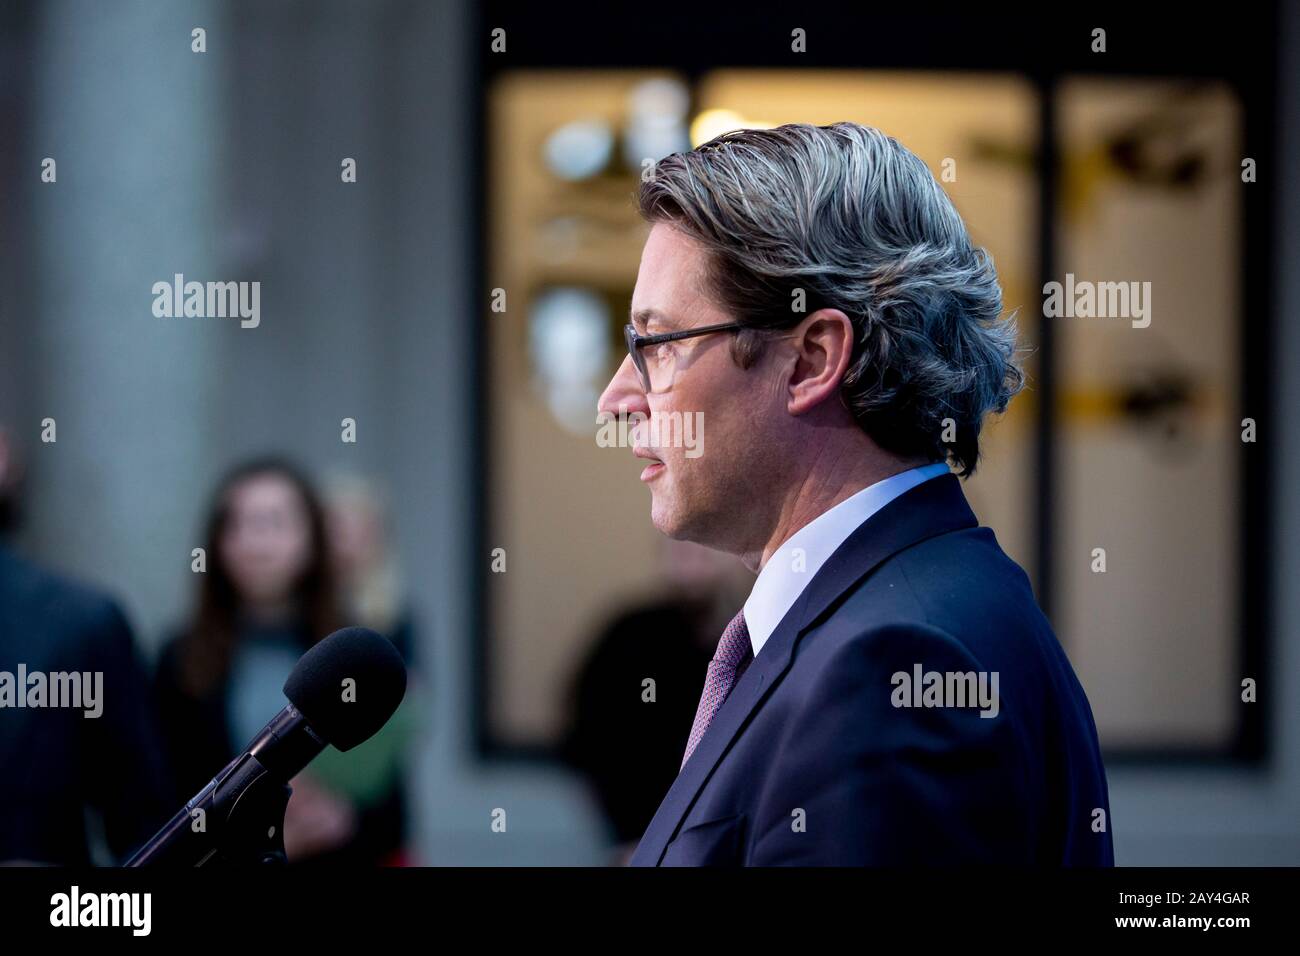 Berlin, Germany. 14th Feb, 2020. Federal Transport Minister Andreas Scheuer (CSU) speaks at a press conference on the topics of speed limits and drones in Berlin. Credit: Christoph Soeder/dpa/Alamy Live News Stock Photo